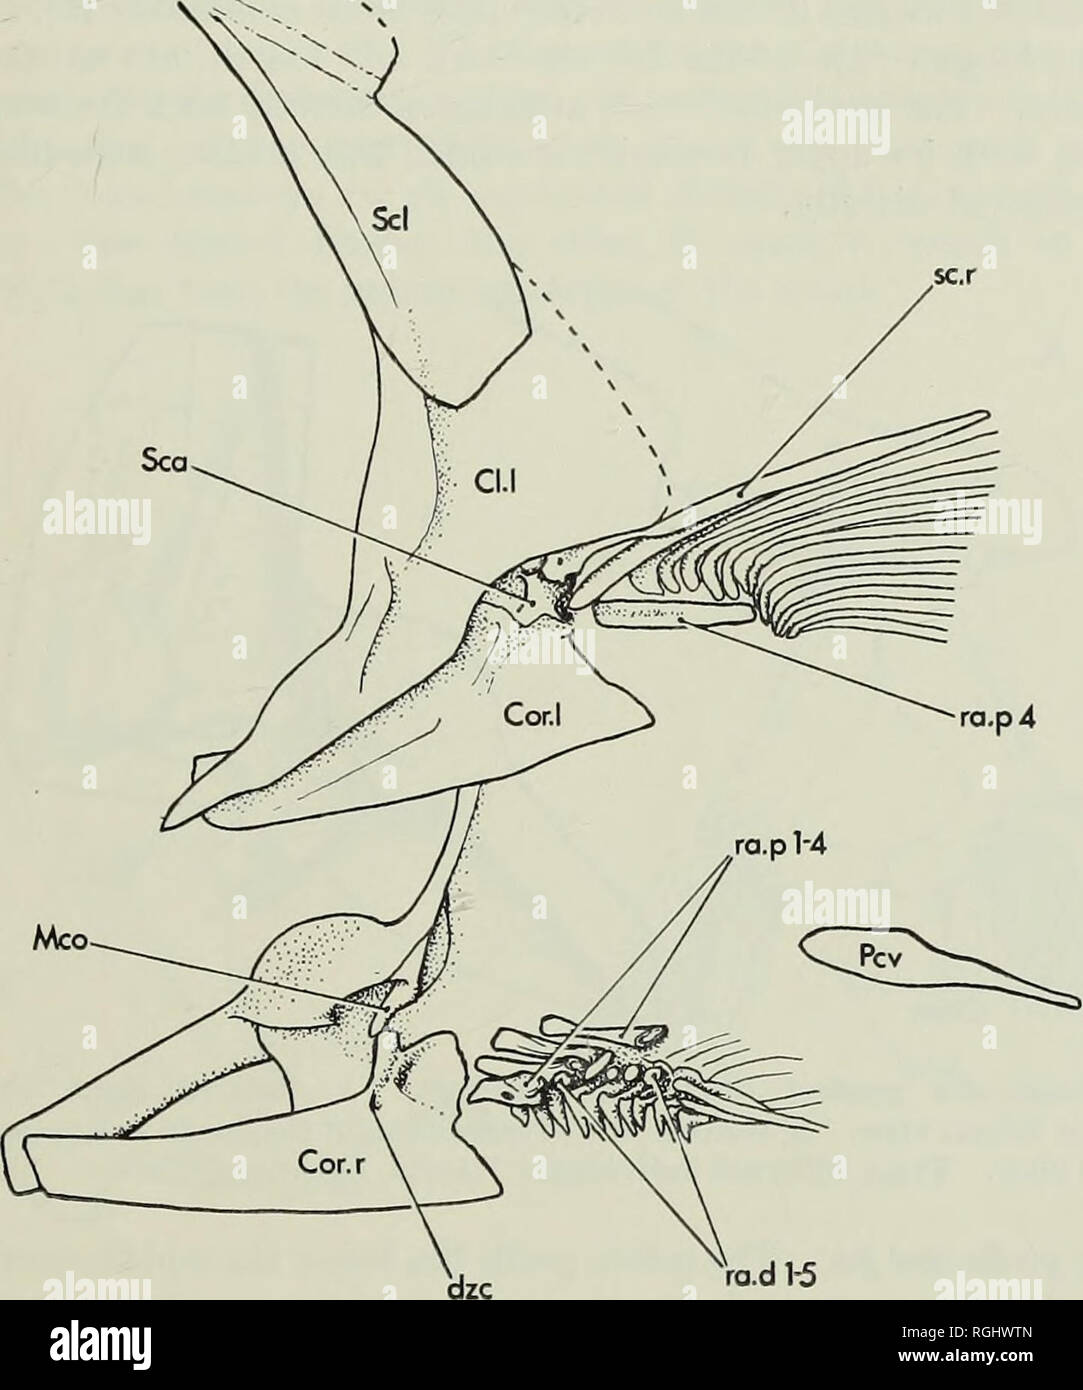 a Wing and pectoral girdle bones of a pigeon (Columba sp.), with